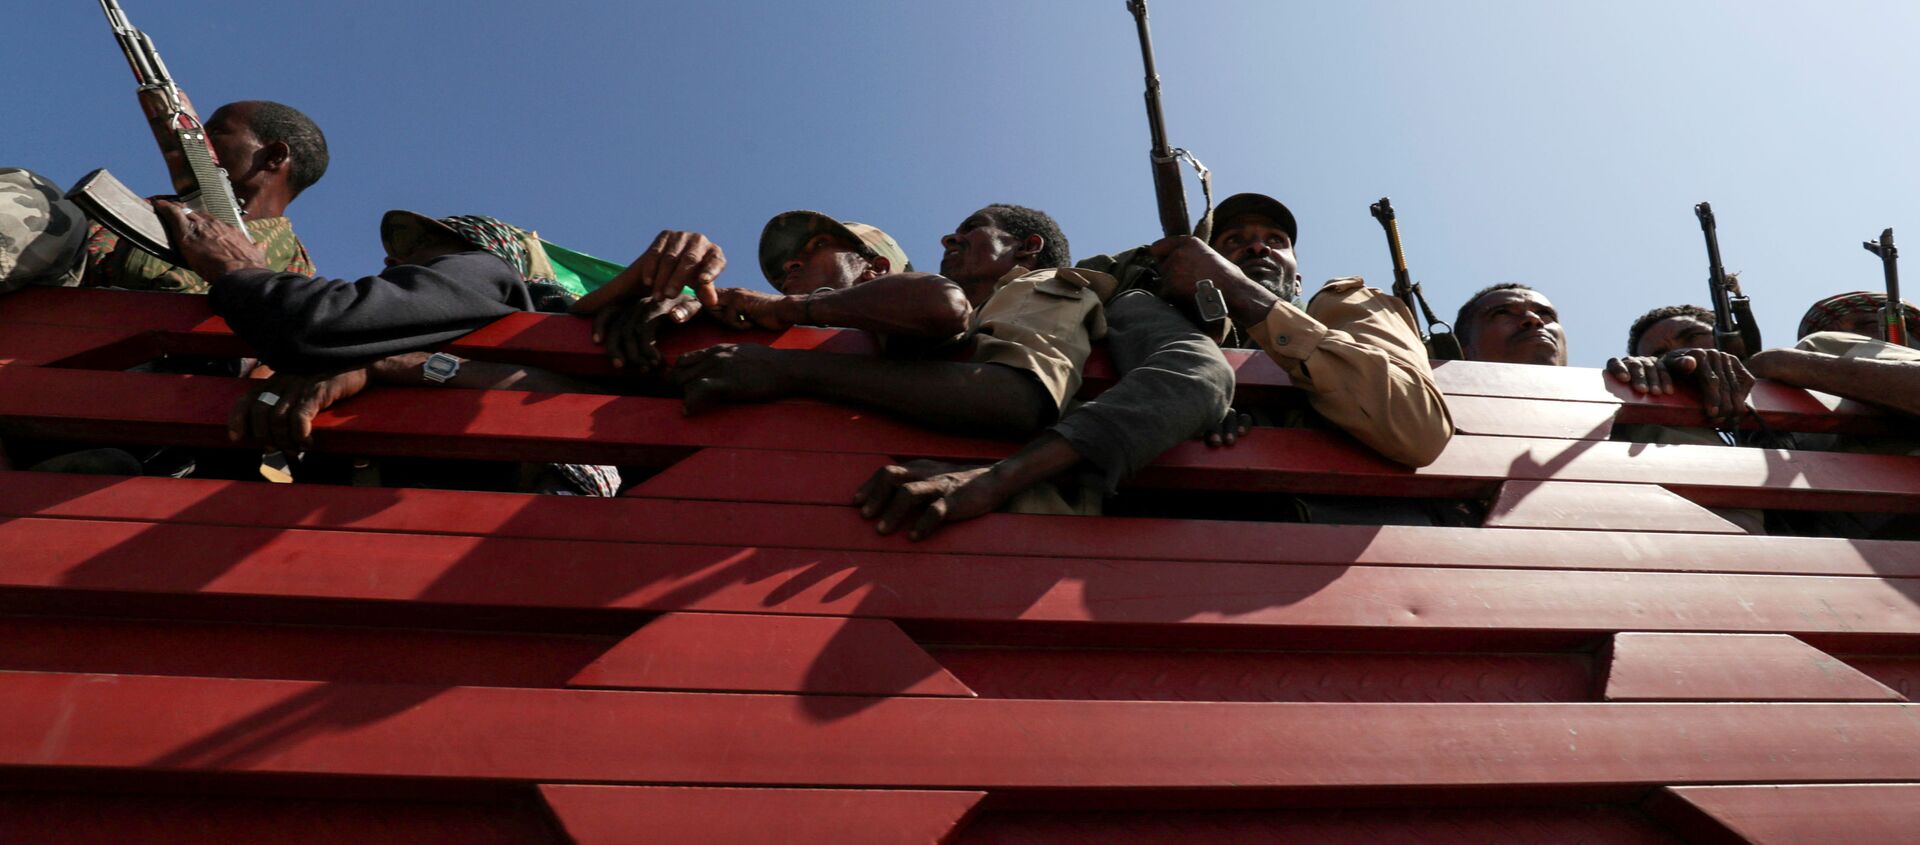 Members of Amhara region militias ride on their truck as they head to the mission to face the Tigray People's Liberation Front (TPLF), in Sanja, Amhara region near a border with Tigray, Ethiopia November 9, 2020 - Sputnik International, 1920, 18.12.2020